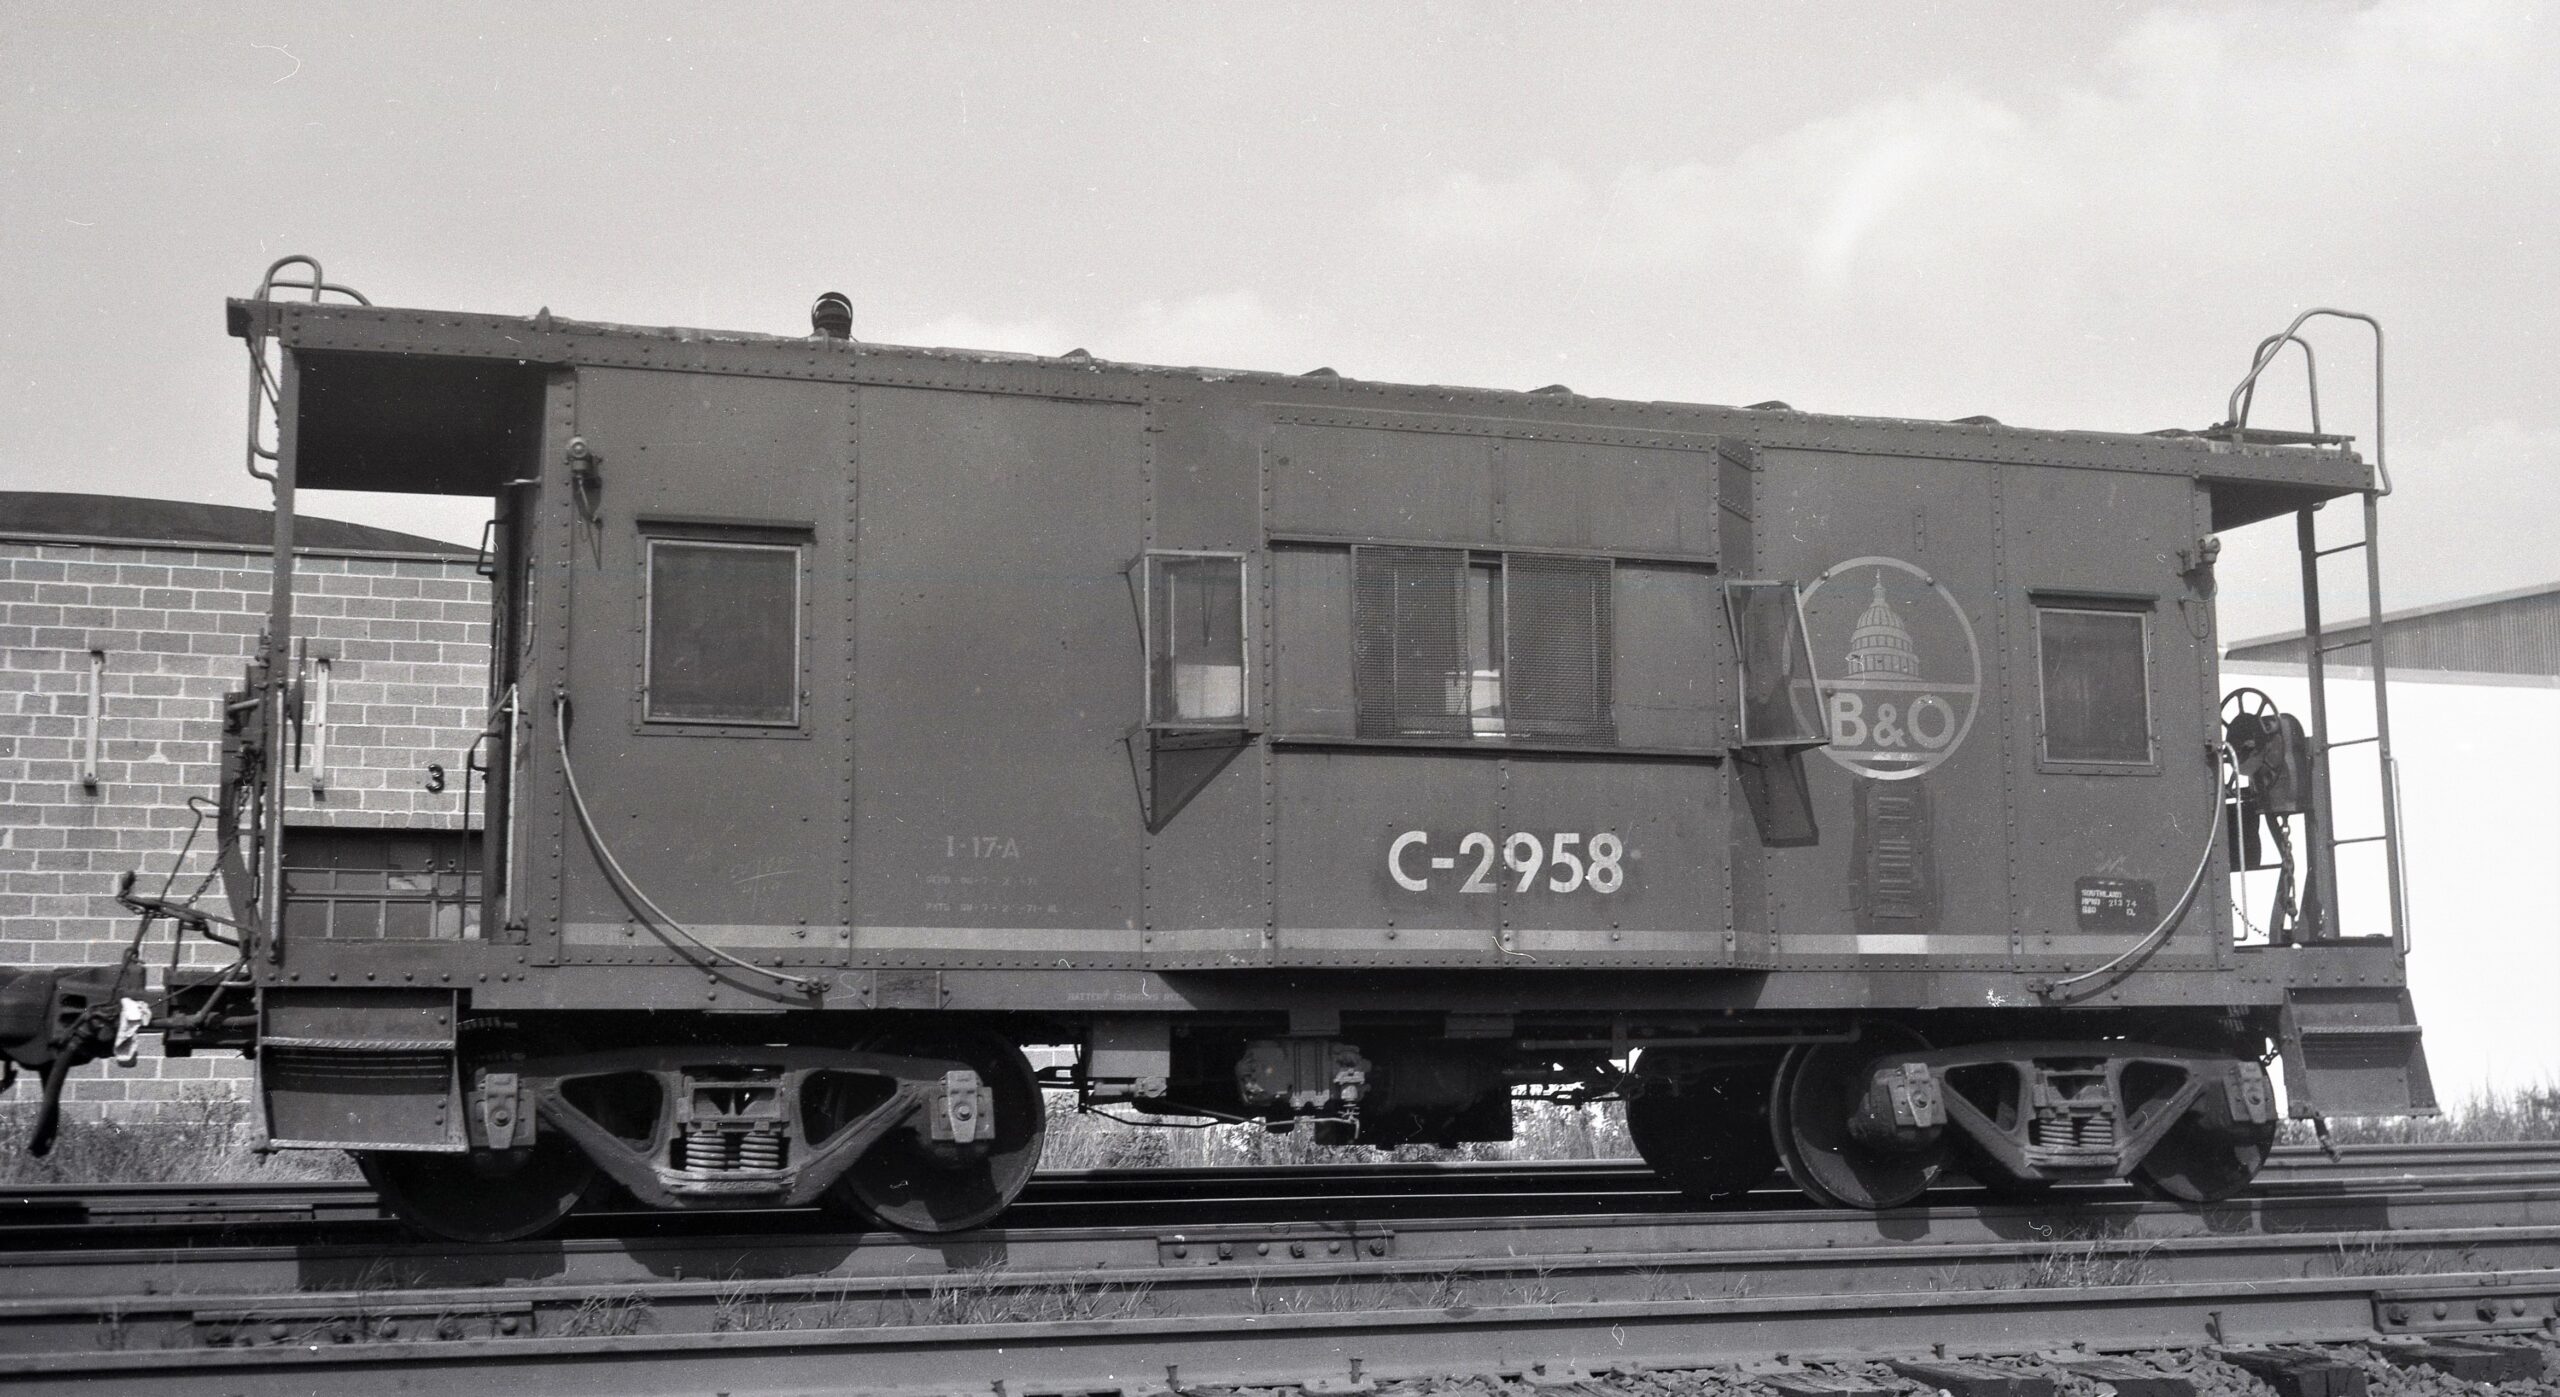 Baltimore and Ohio | Roselle, New Jersey | Caboose I-17A class C-2958 | September 27, 1975